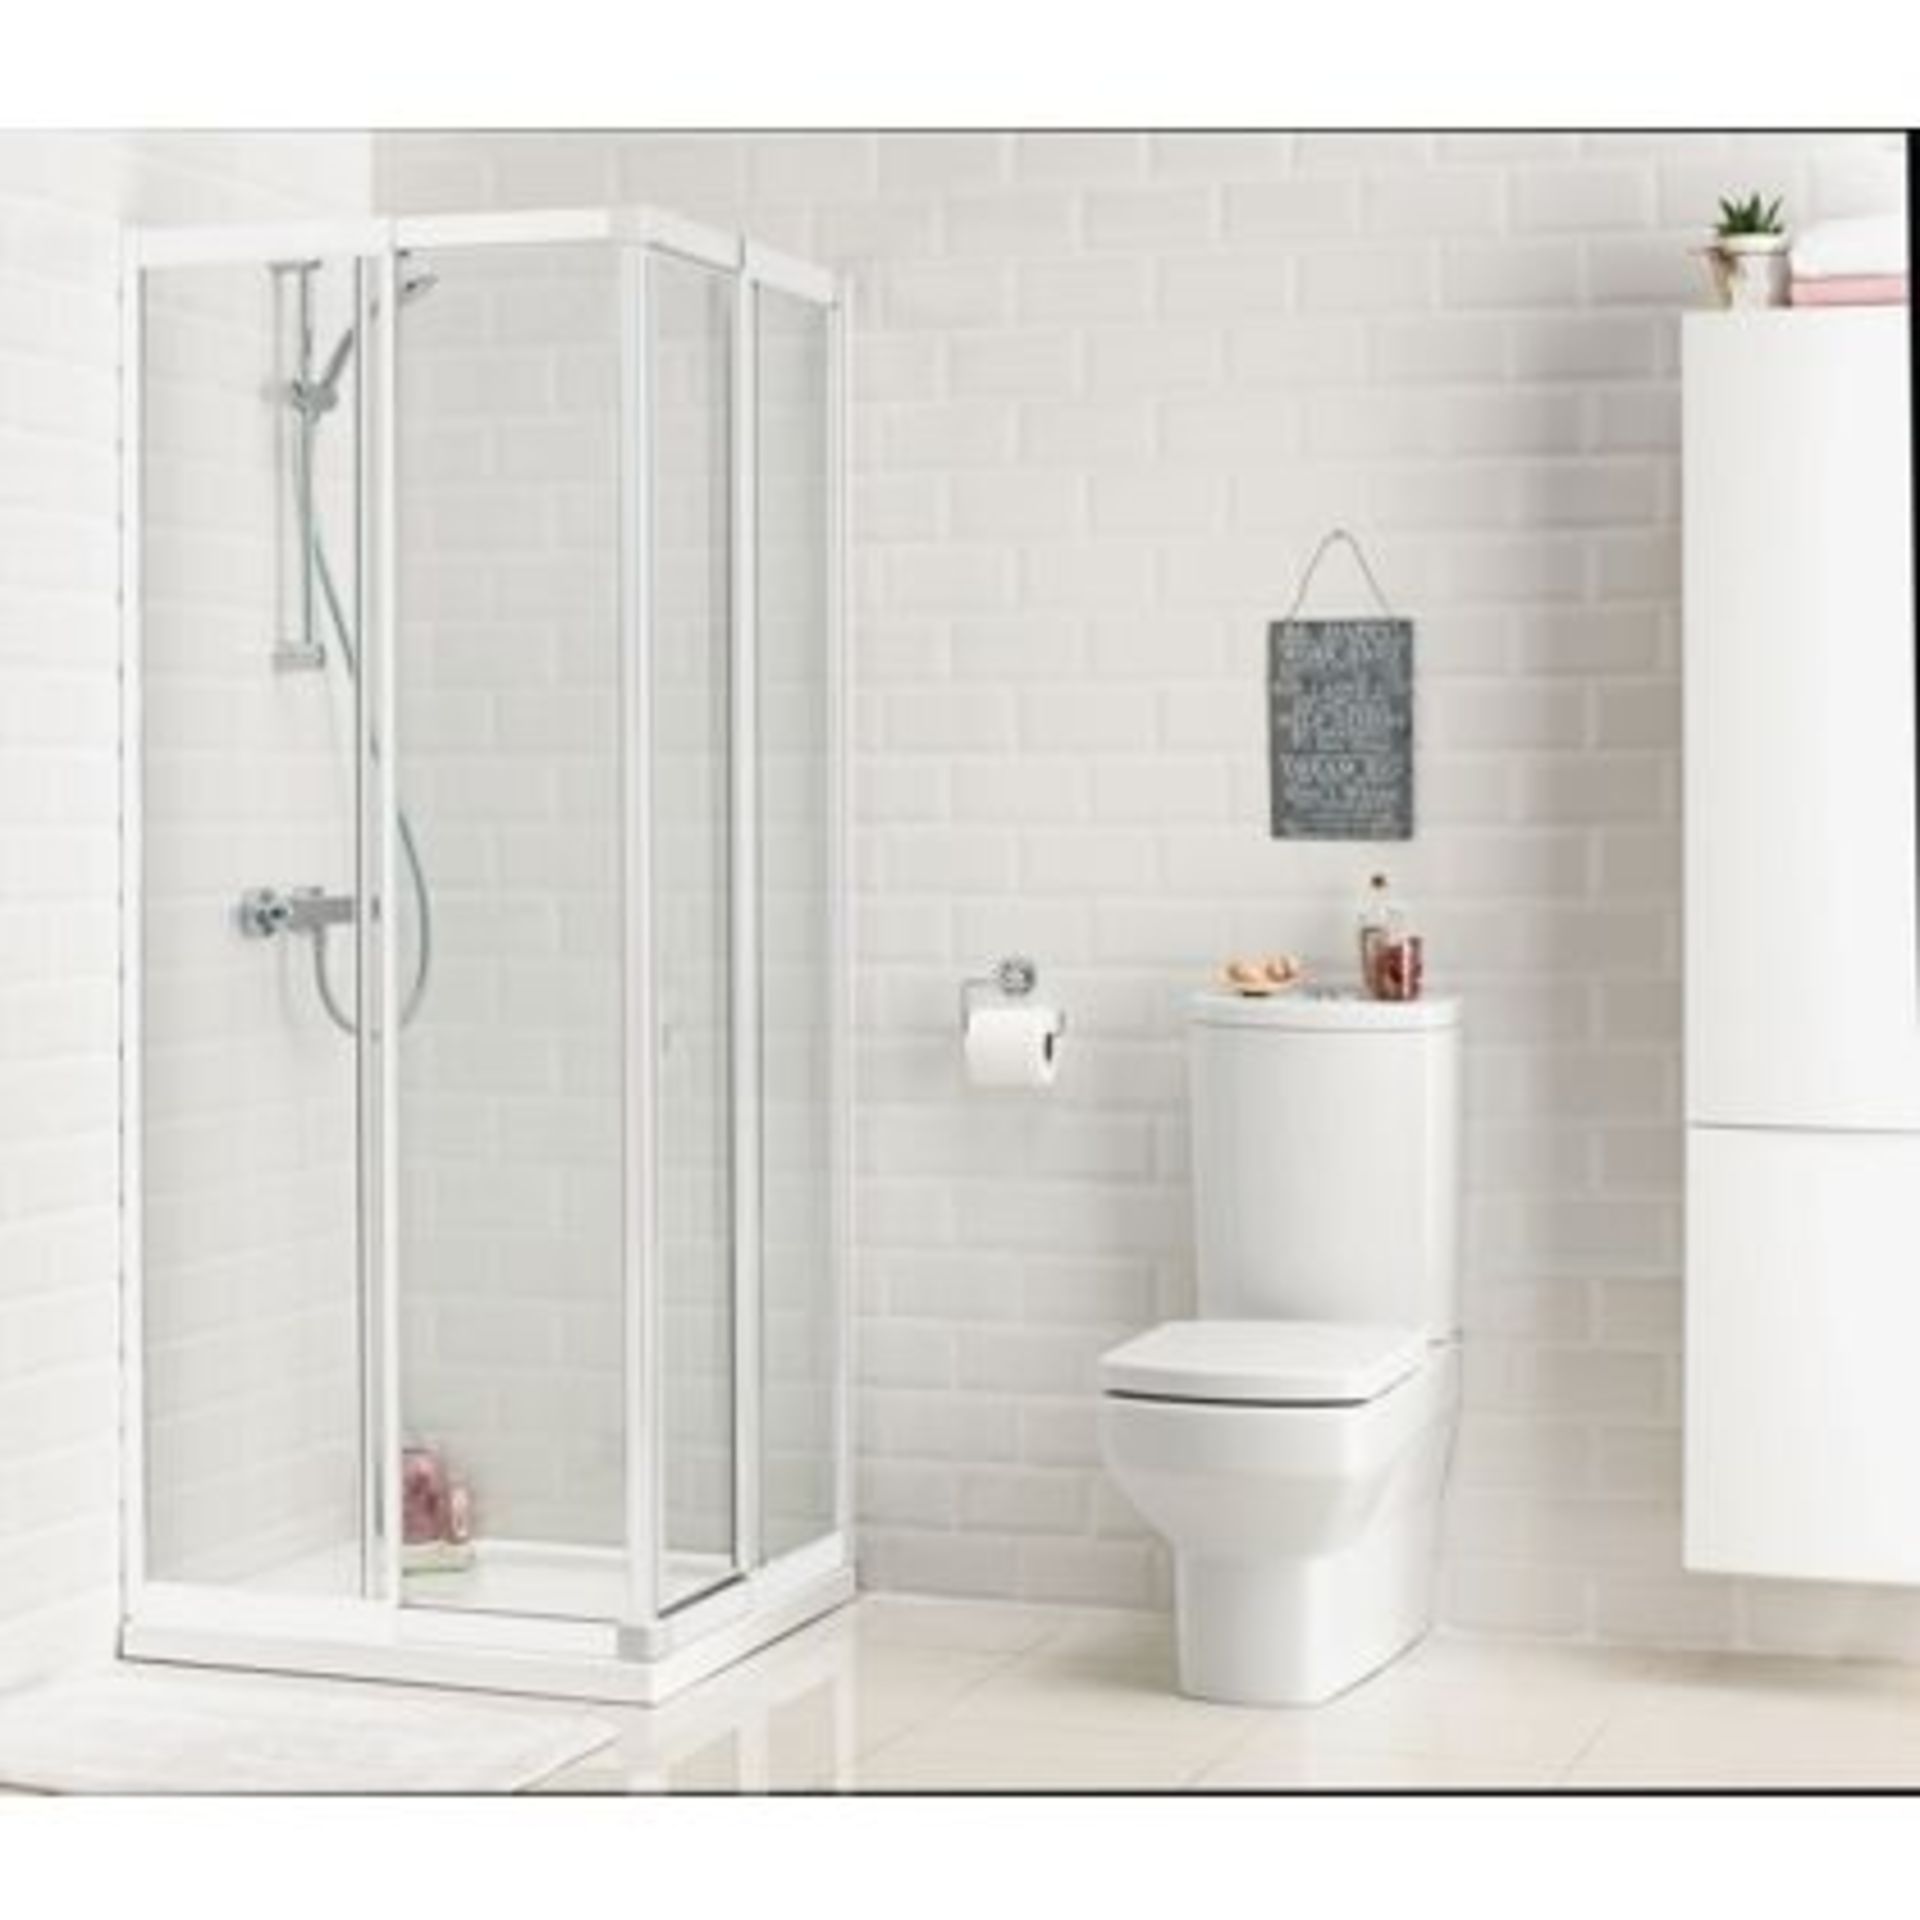 (AAA144) Aqualux Crystal Corner Entry Shower Enclosure - 760 x 800mm - White. Brand New & Sealed.